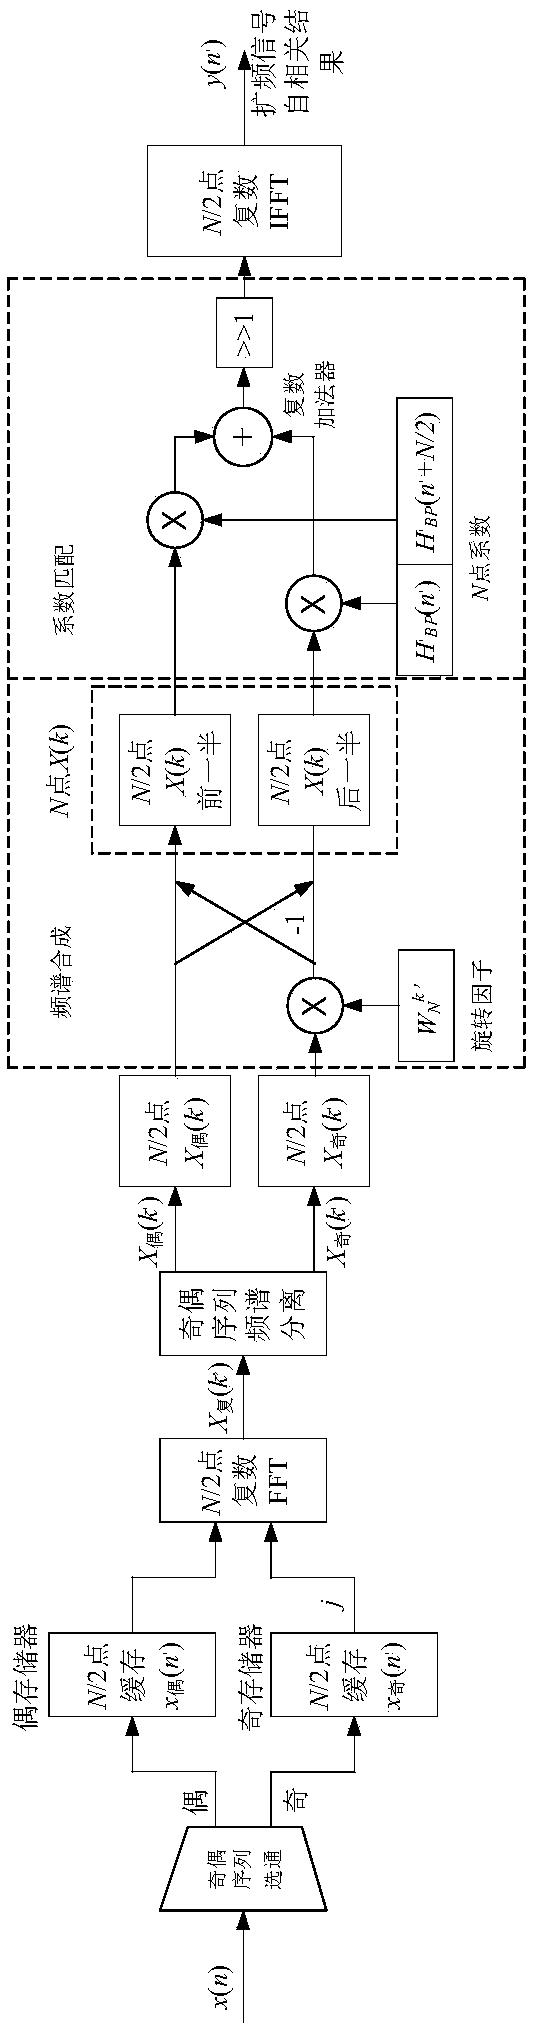 A frequency domain processing based spread spectrum signal matched filtering system and method